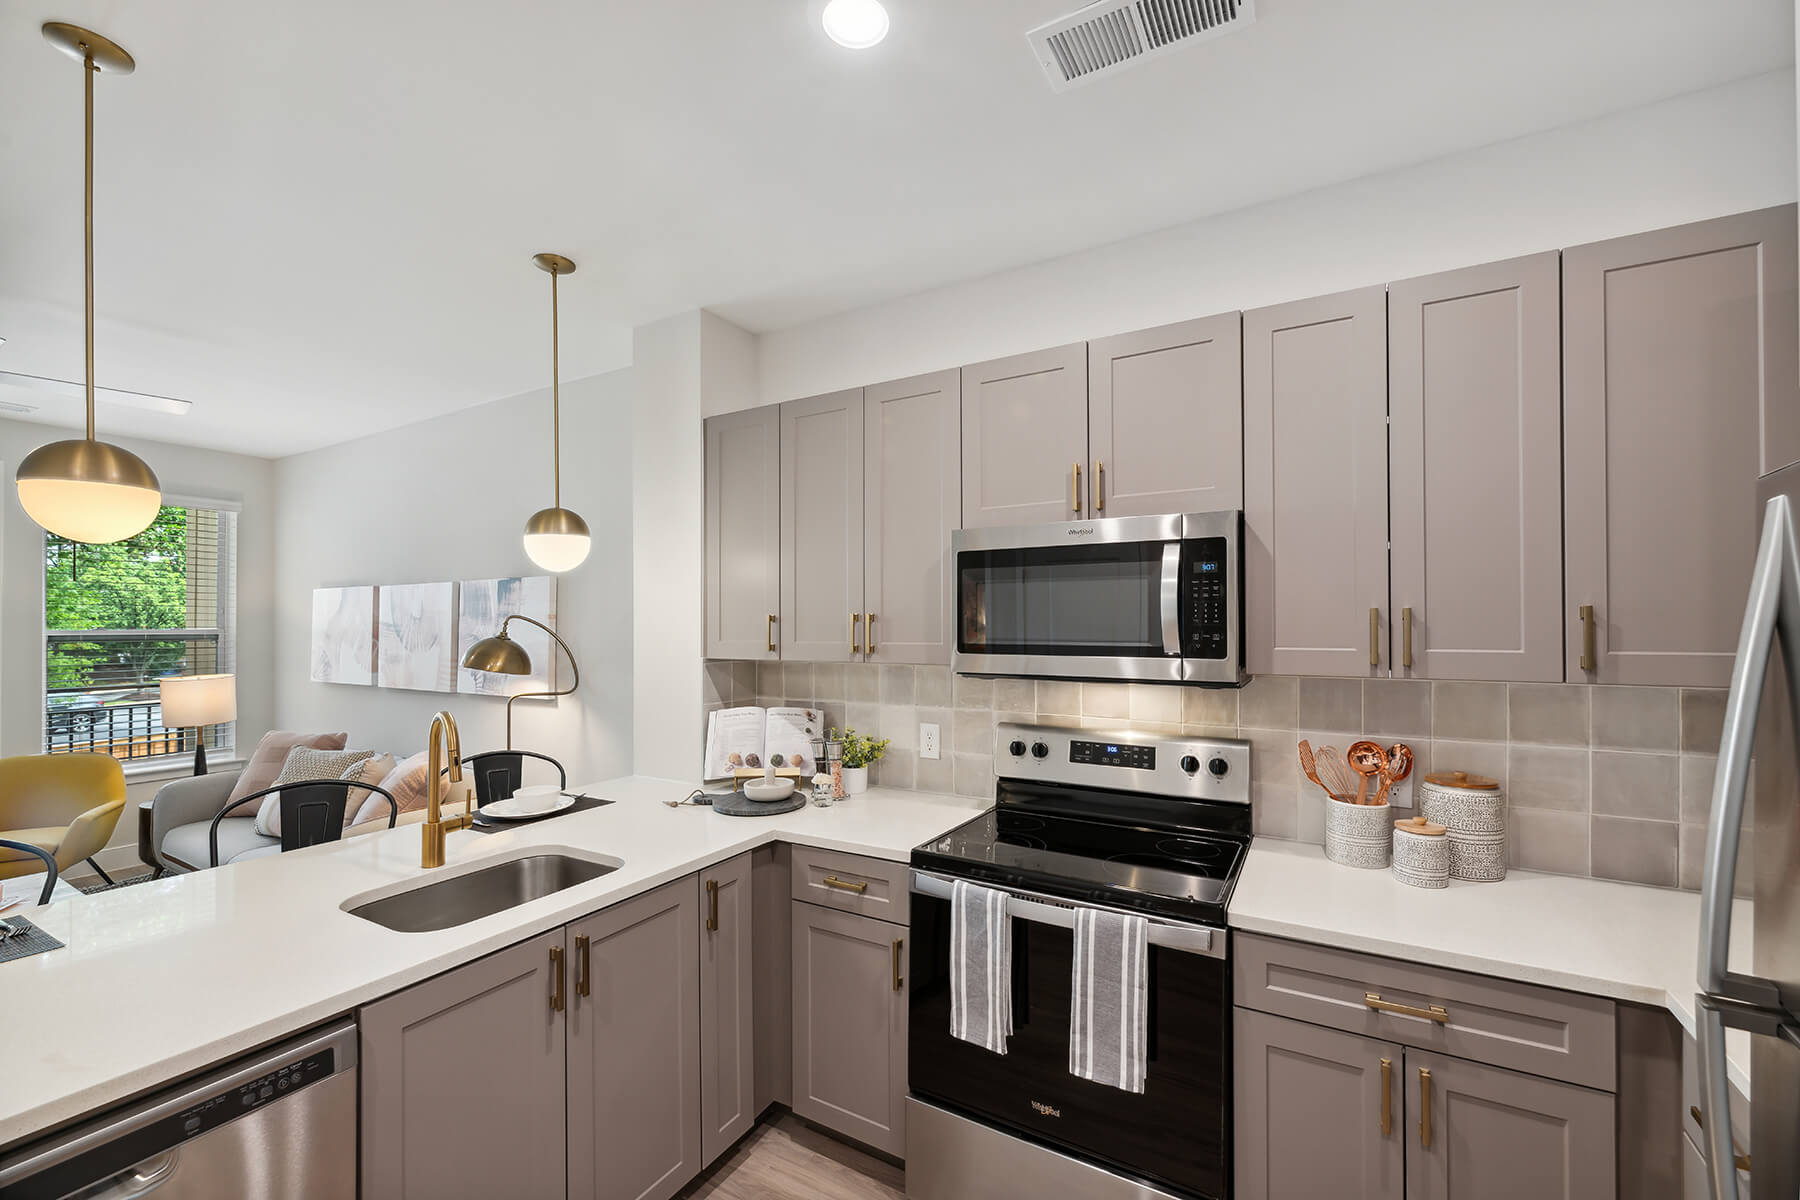 A spacious, modern kitchen at The Moxley in Fairfax, Virginia.